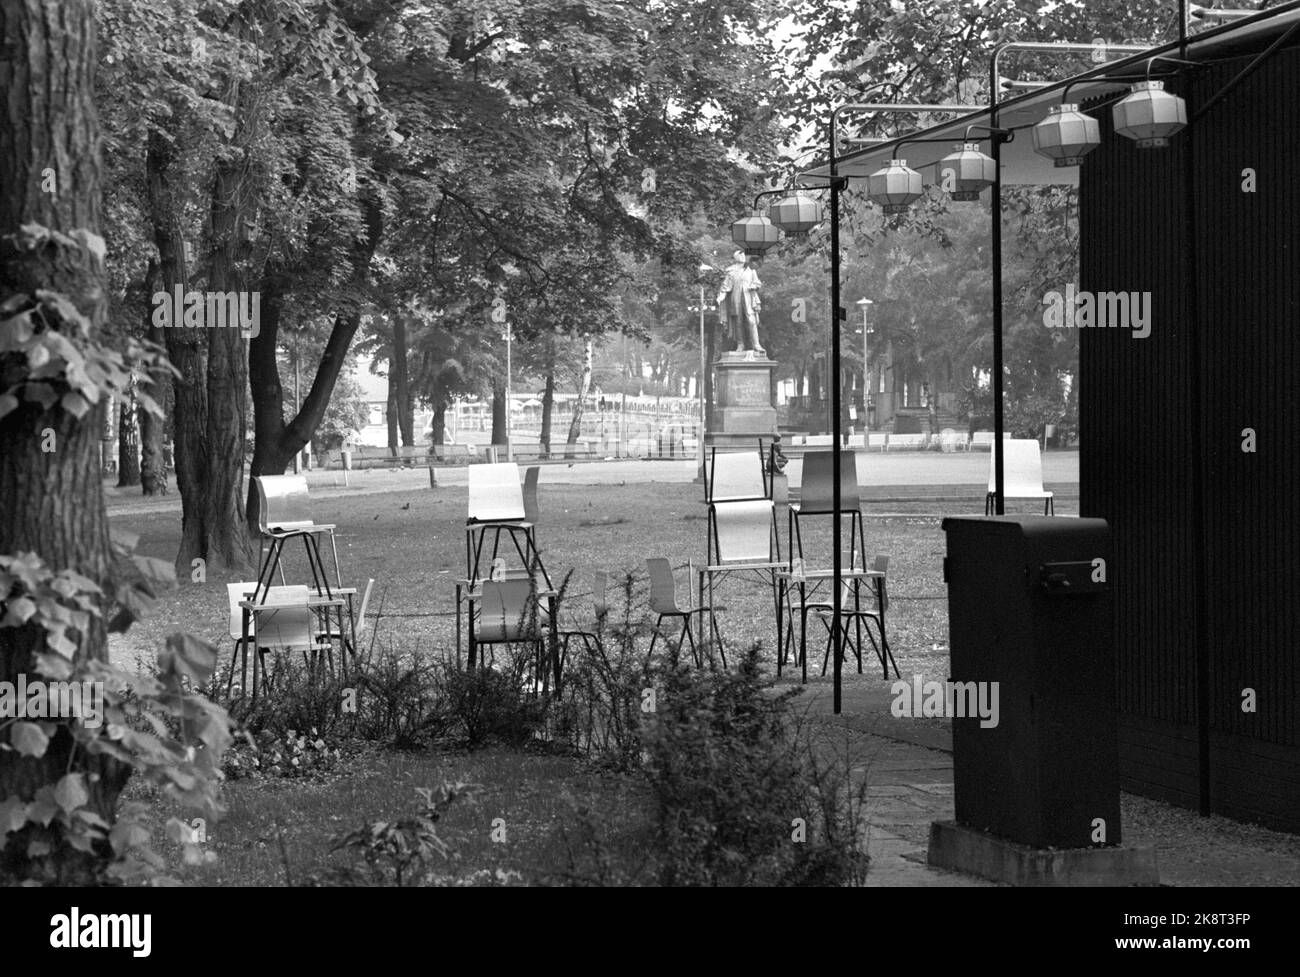 Restaurant in the city Black and White Stock Photos & Images - Page 2 -  Alamy